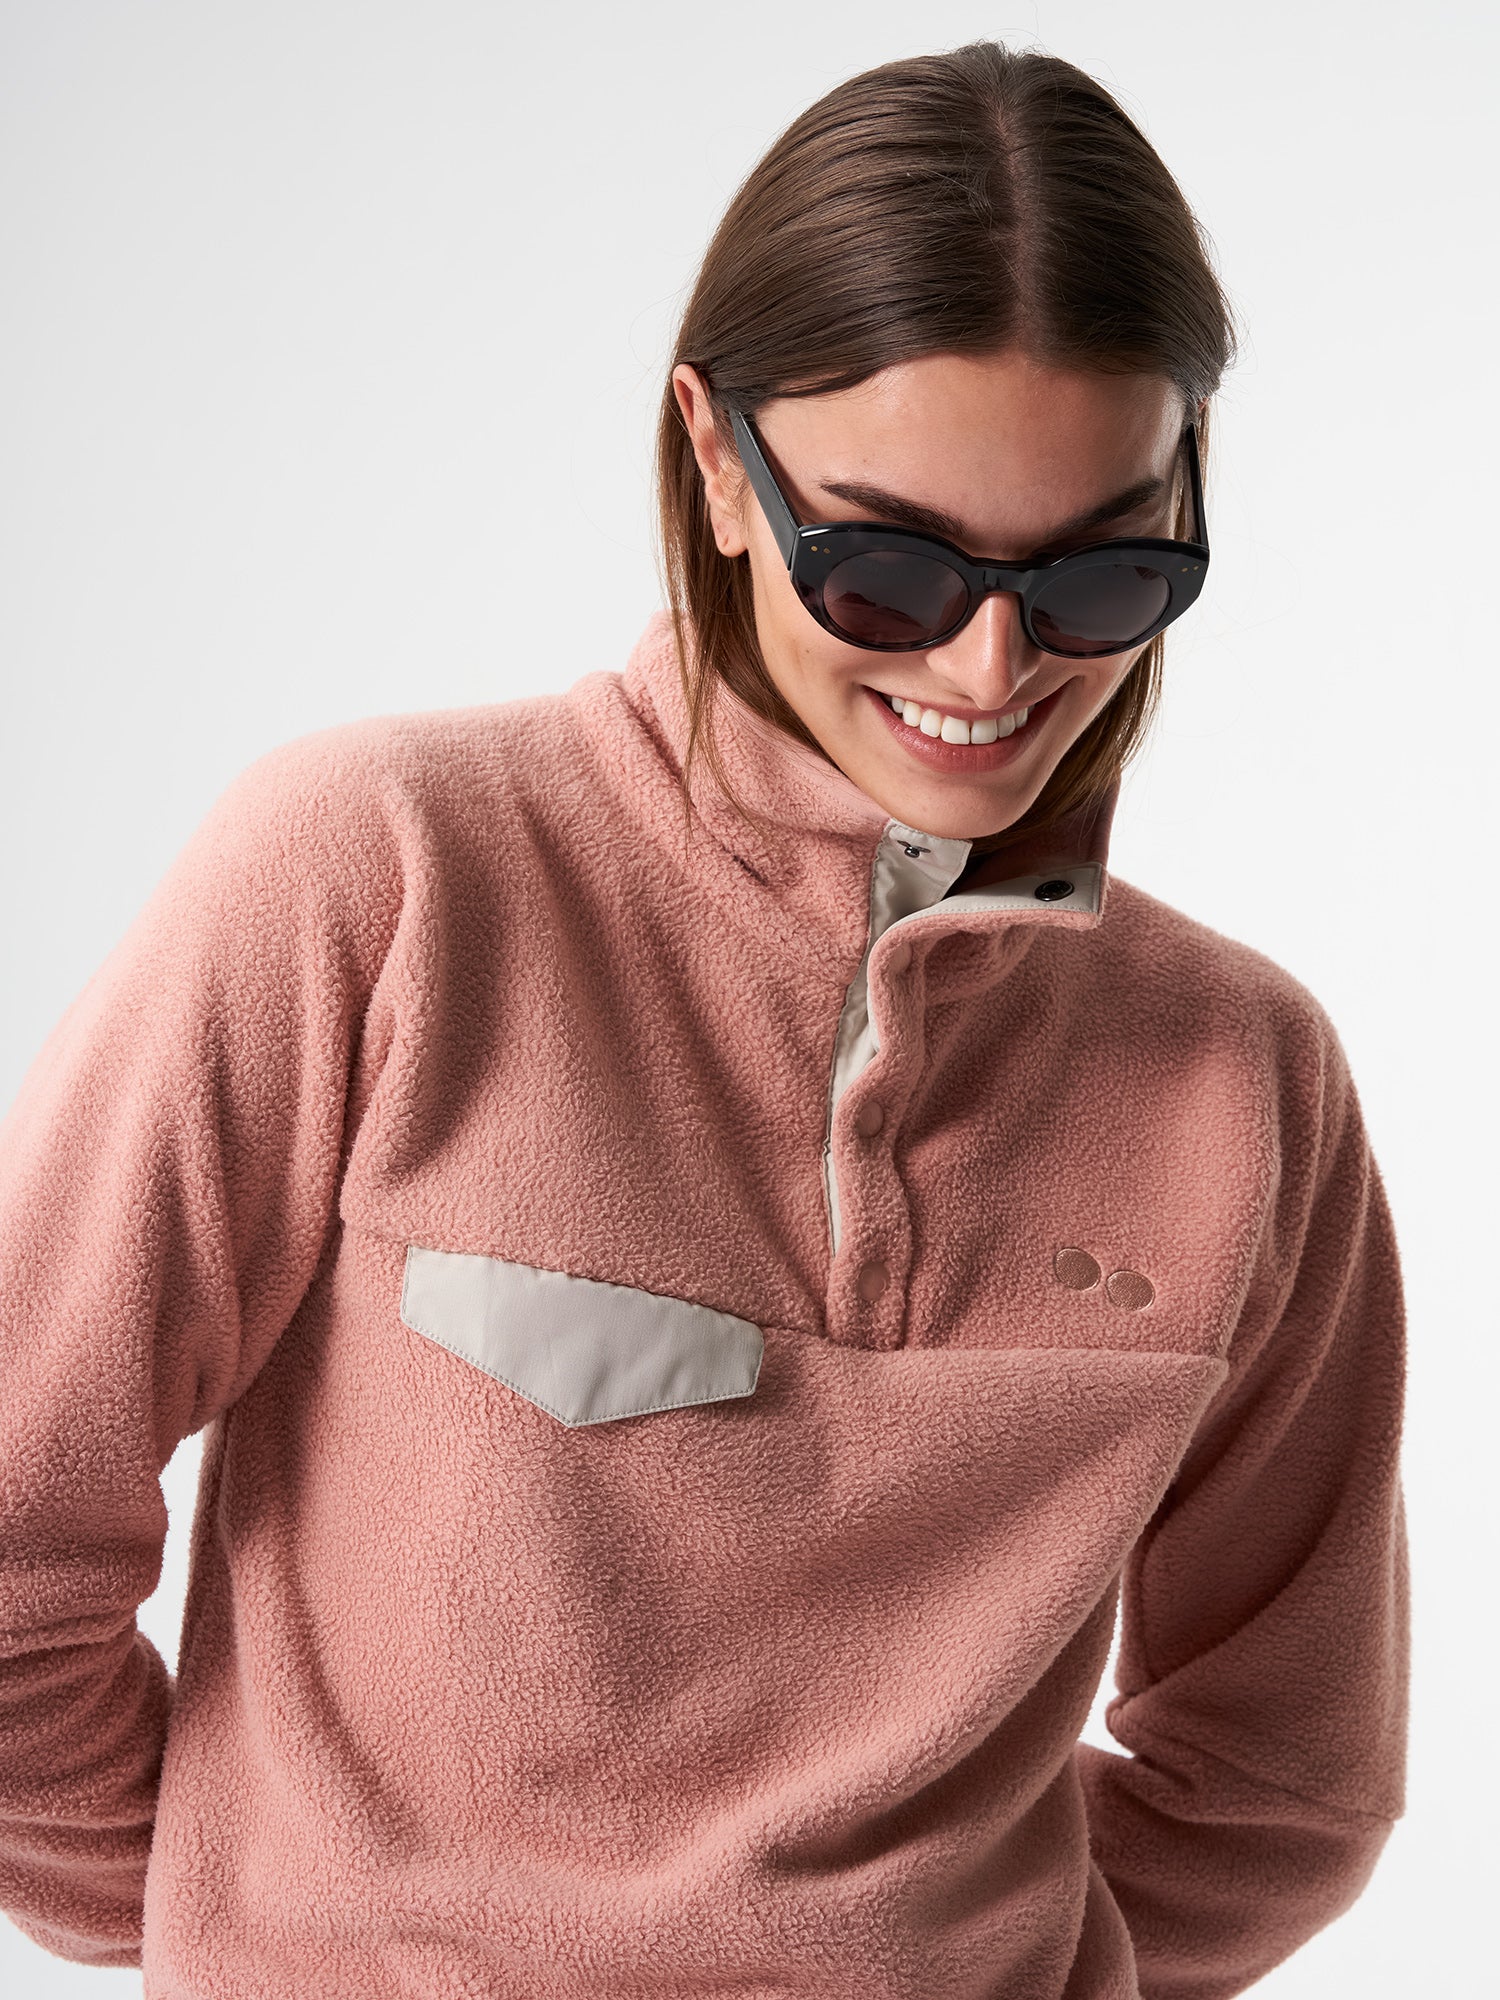 Fleece Pullover - Soft, warm and sustainable ✓ – pinqponq